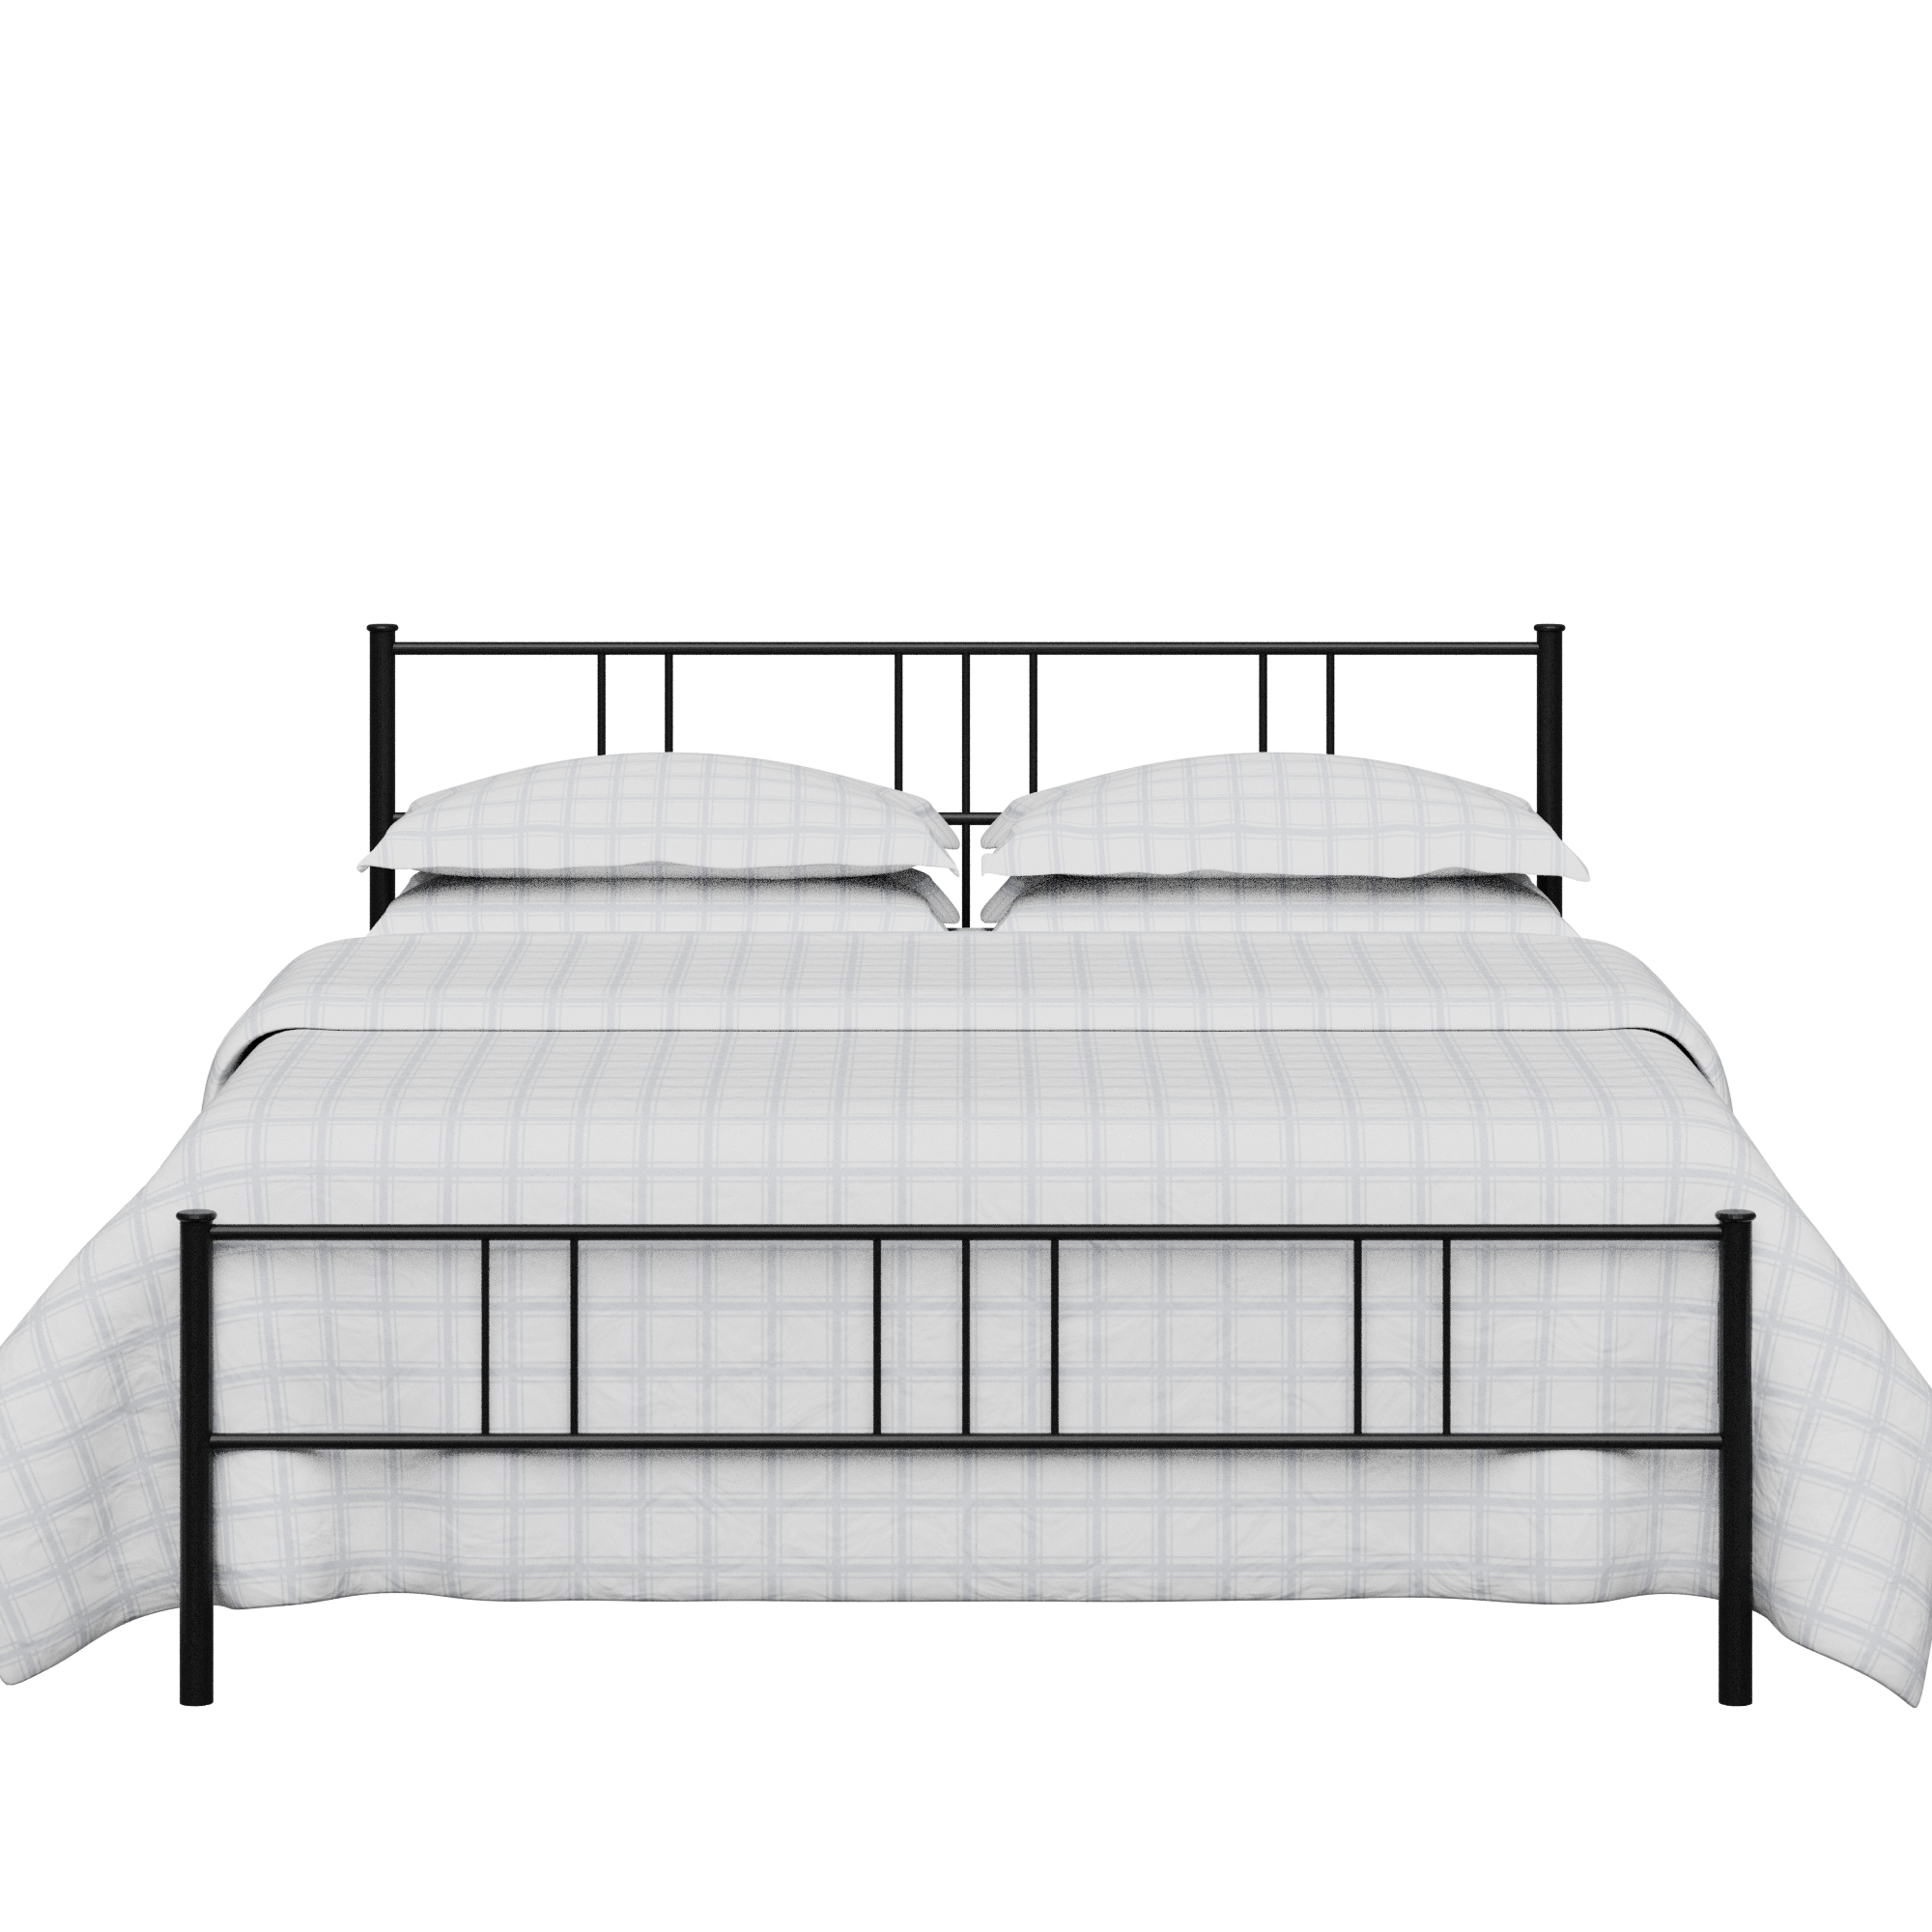 Mortlake Iron Metal Bed Frame The, What Kind Of Metal Are Bed Frames Made Of